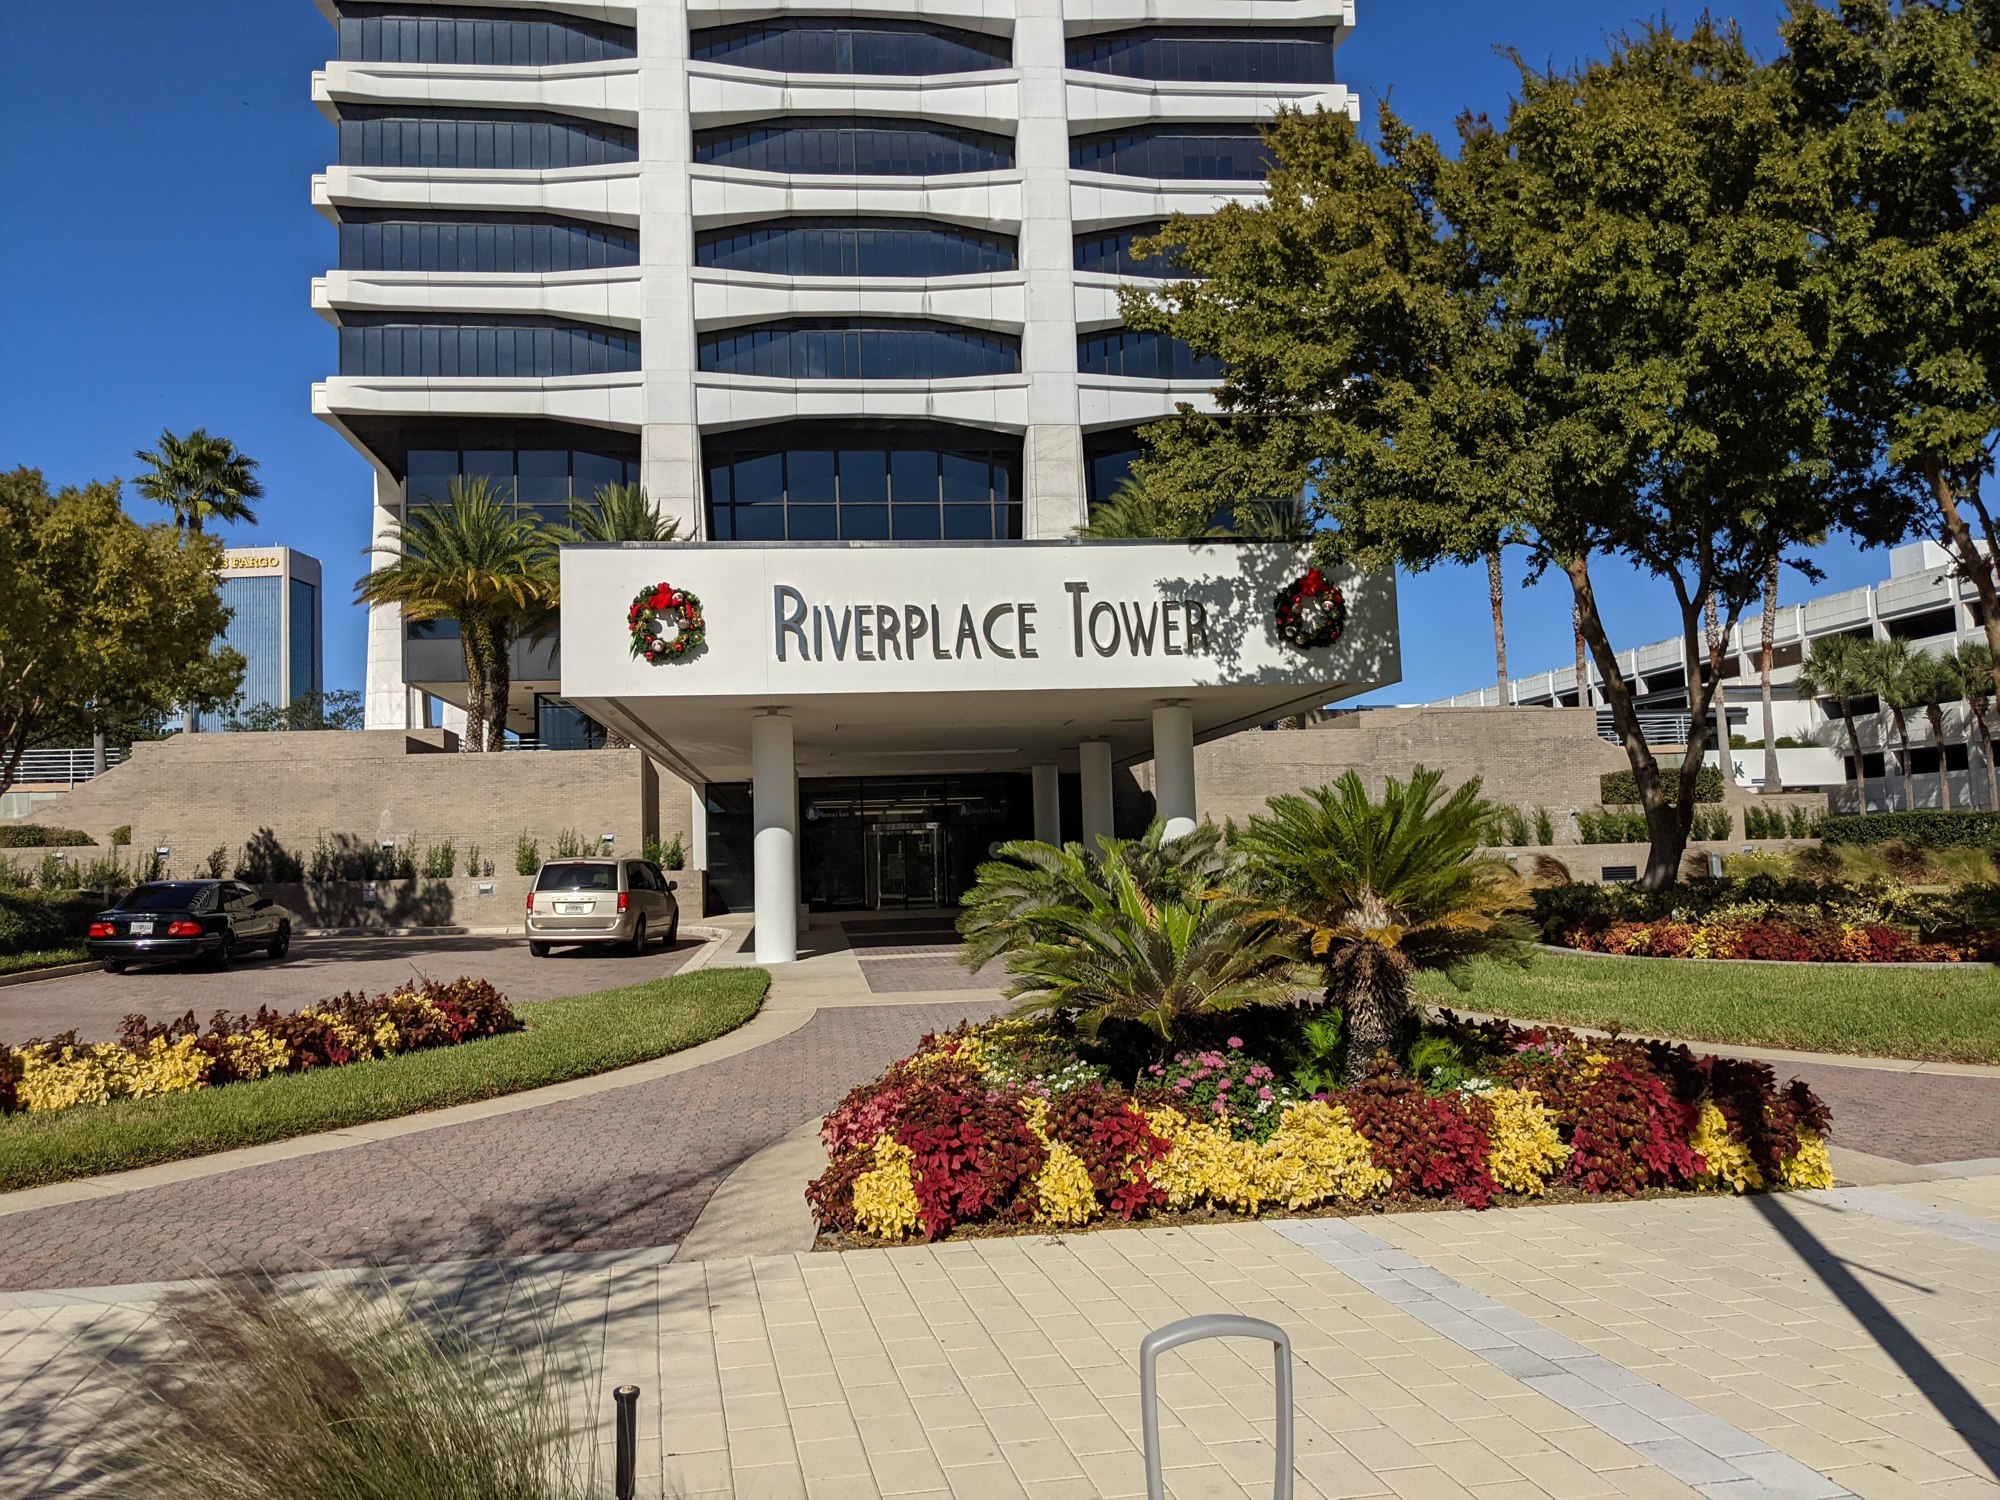 RiverPlace Tower is anchored by Ameris Bank and tenants including Rayonier Advanced Materials Inc., the Rogers Towers law firm and Macquarie Global Services (USA) LLC.